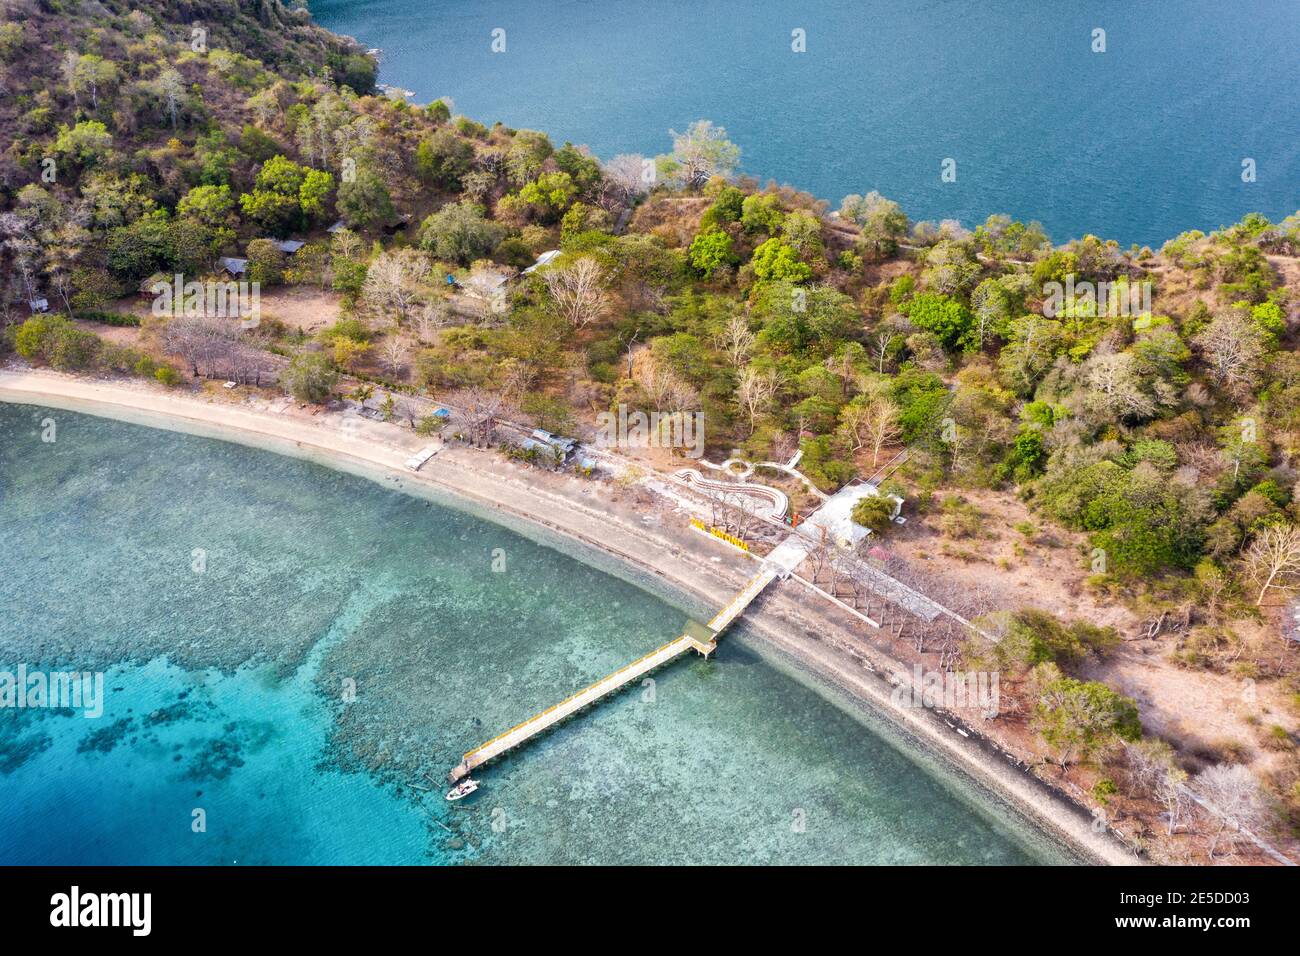 Aerial view of boat moored along a wooden jetty, Satonda island, West Nusa Tenggara, Indonesia Stock Photo